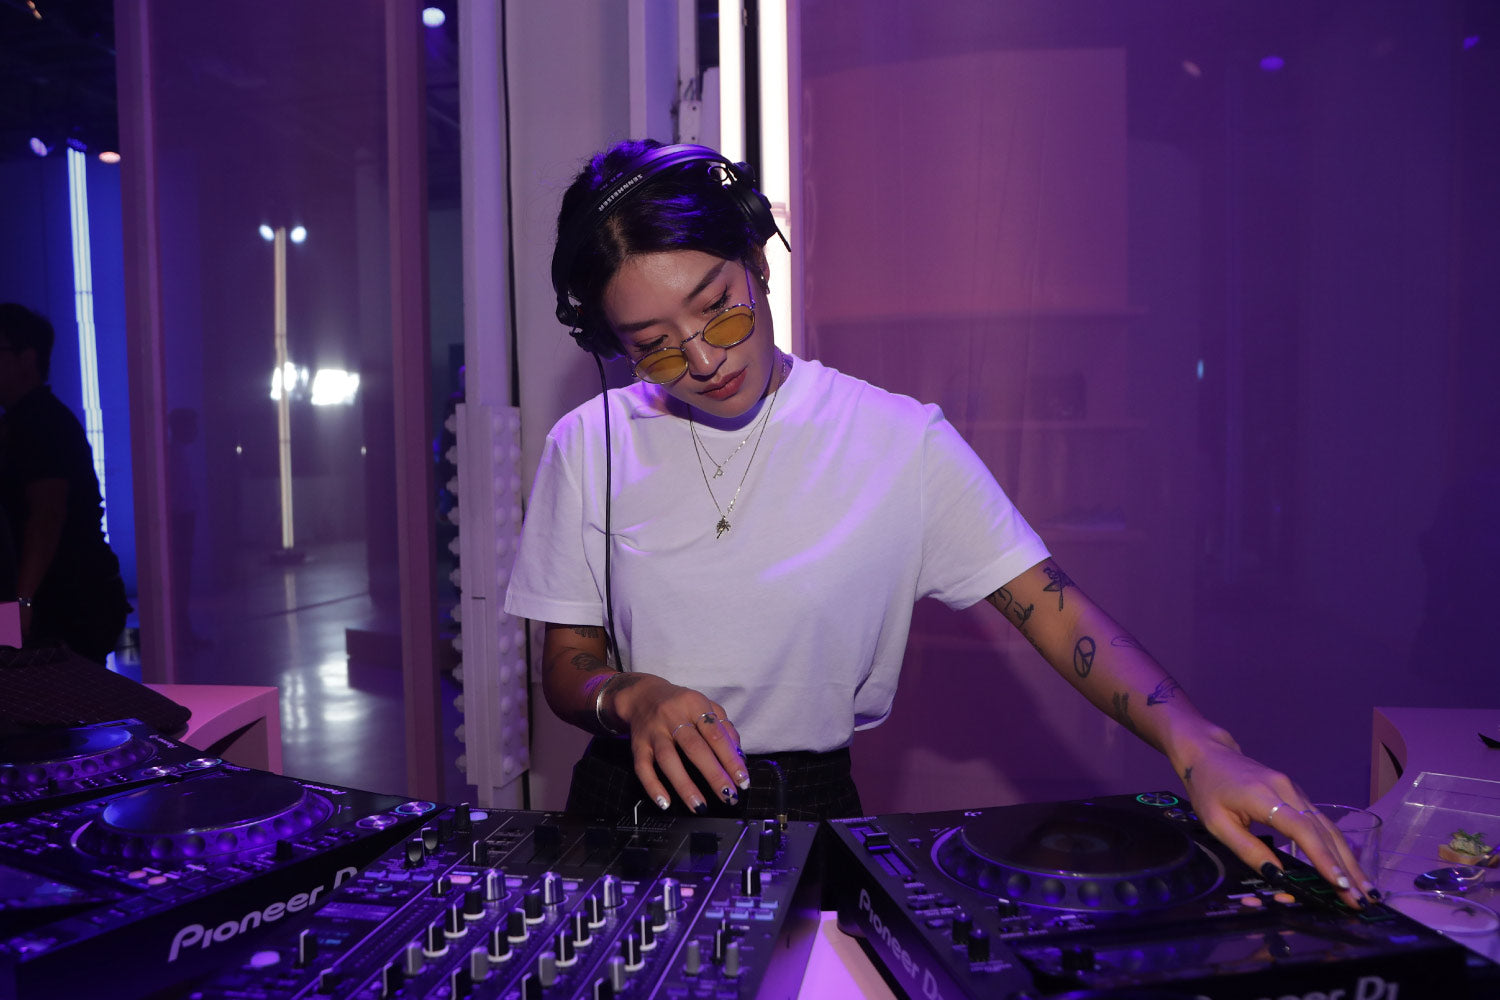 Peggy Gou Archives - We Own The Nite NYC